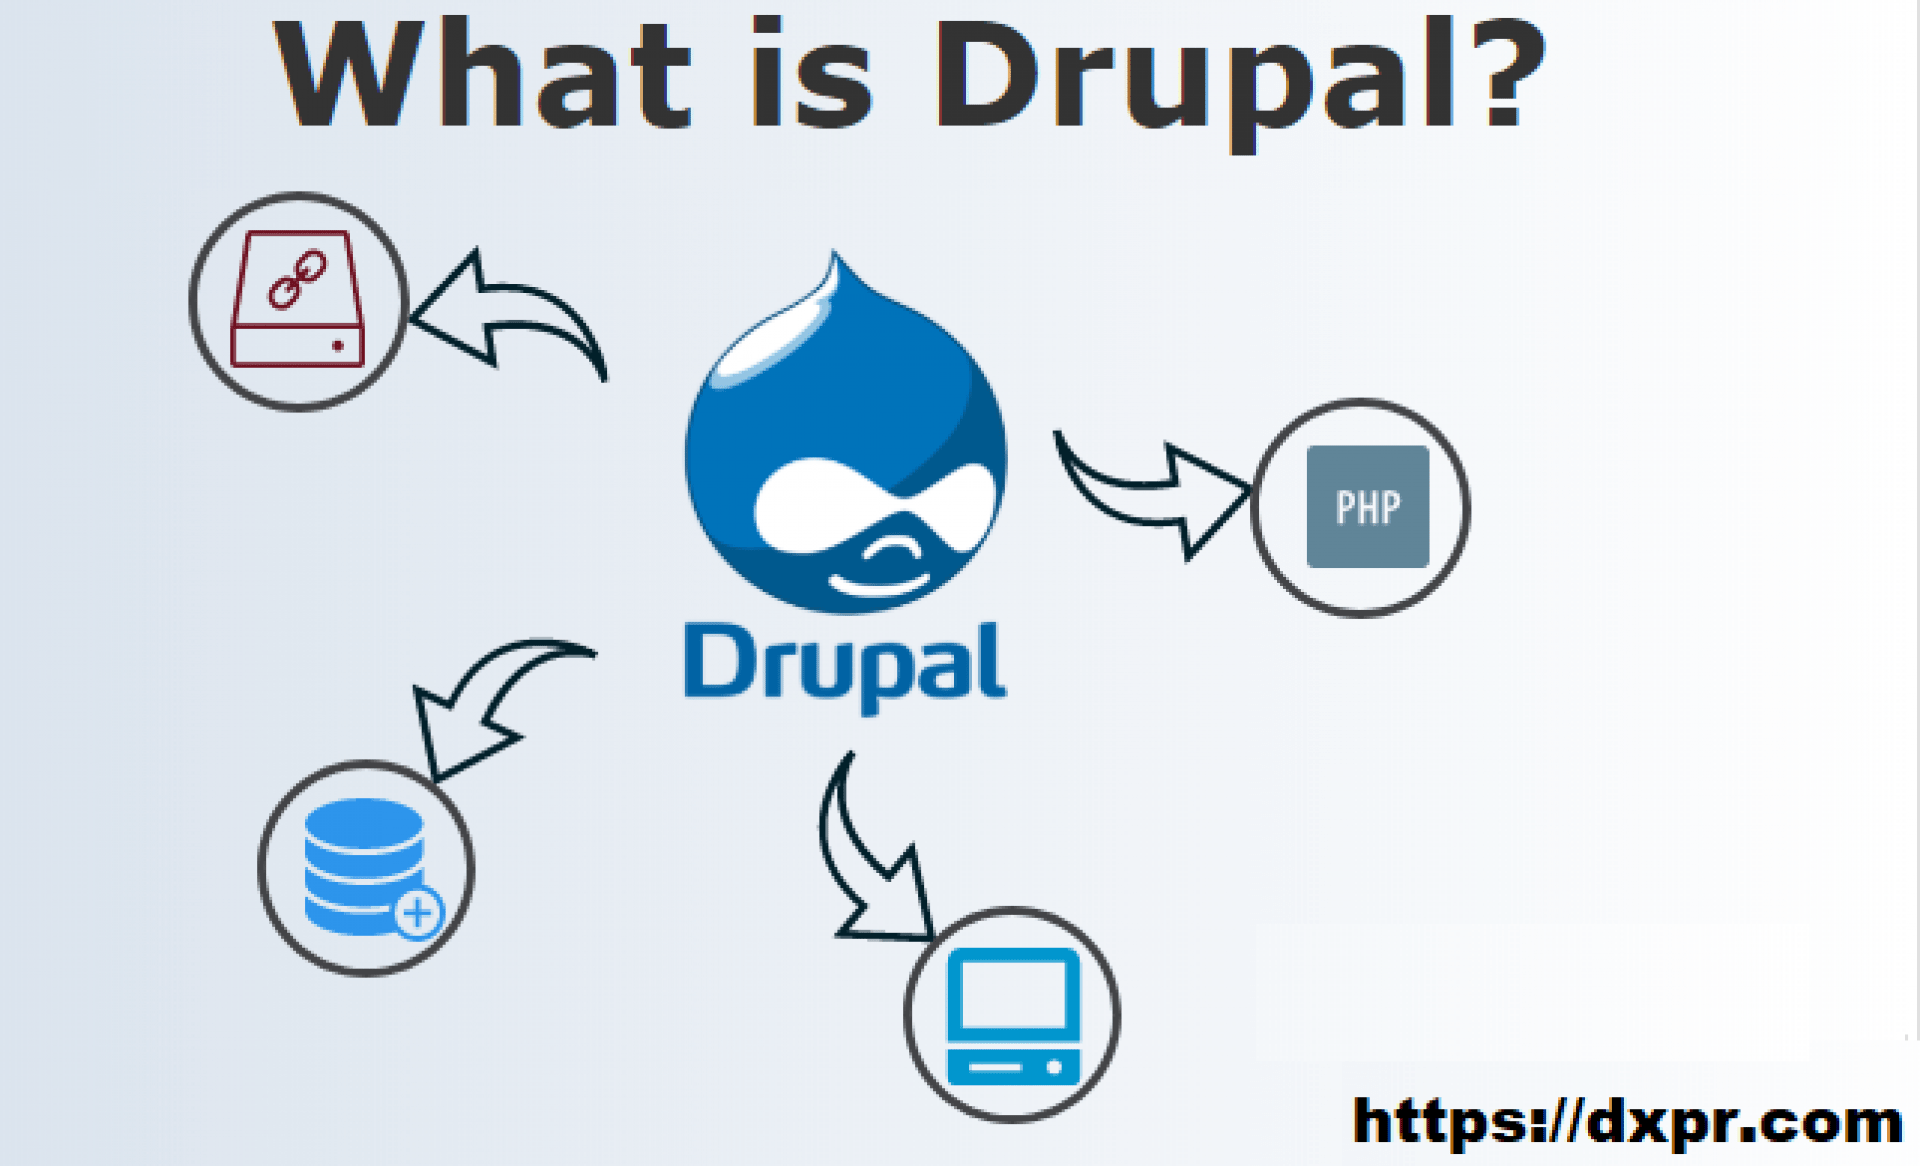 What is Drupal user for?